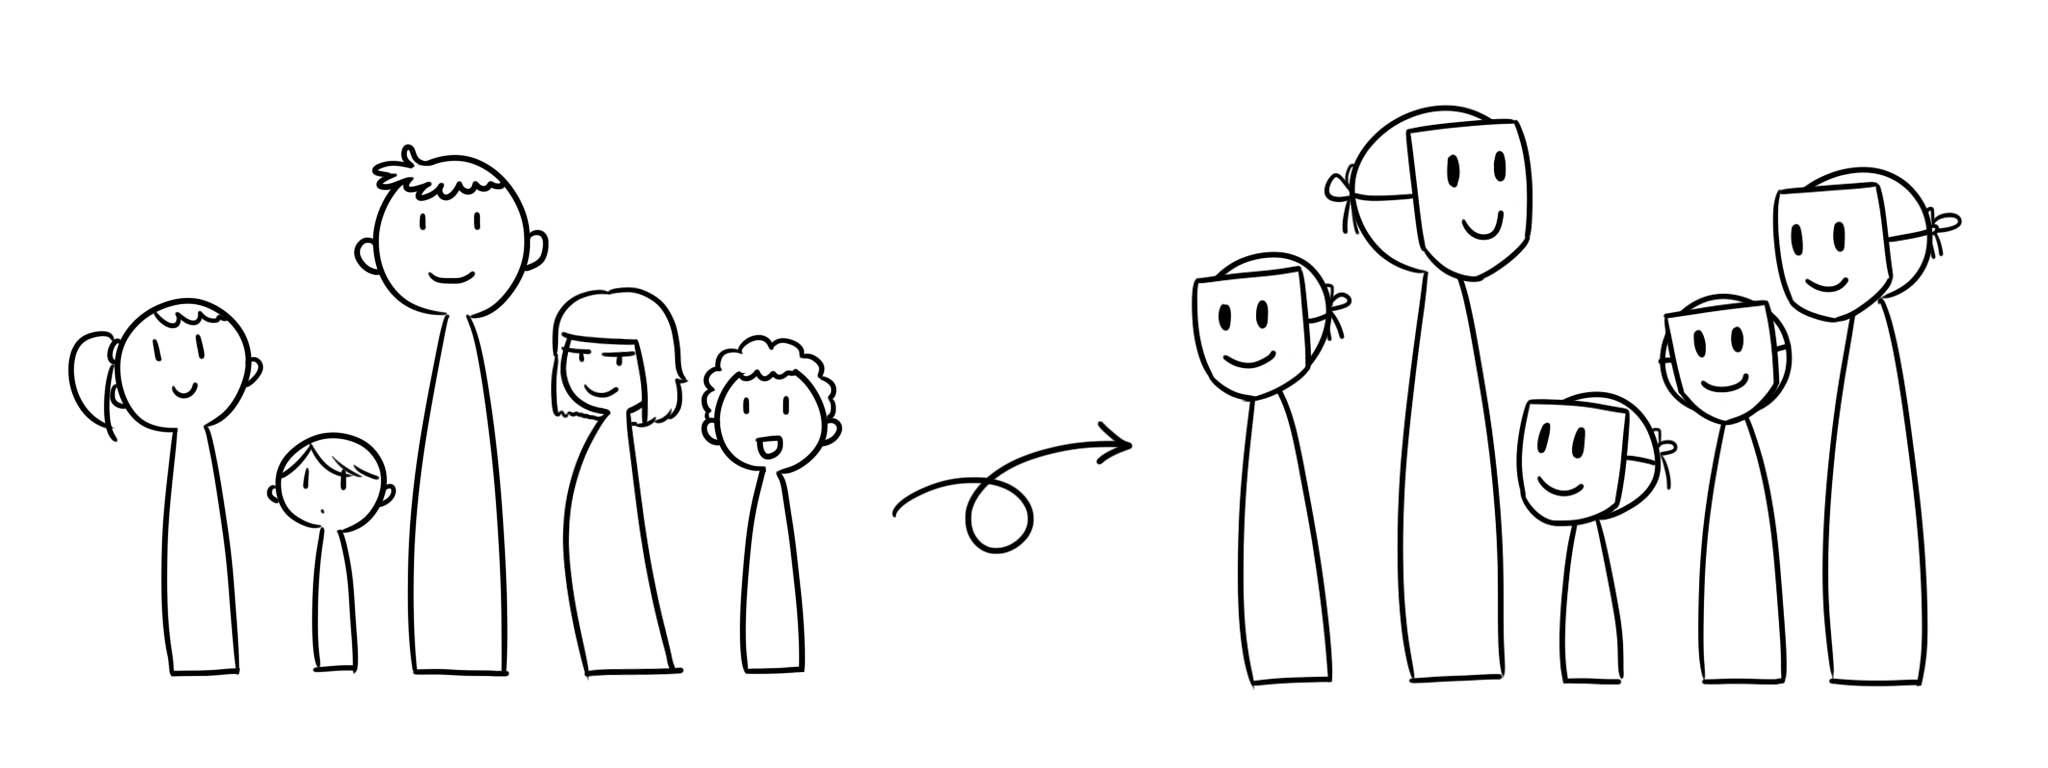 A comic-style illustration of a group of individual people all of different height being turned into by a group of uniformly looking people of different height, wearing masks to stay anonymous